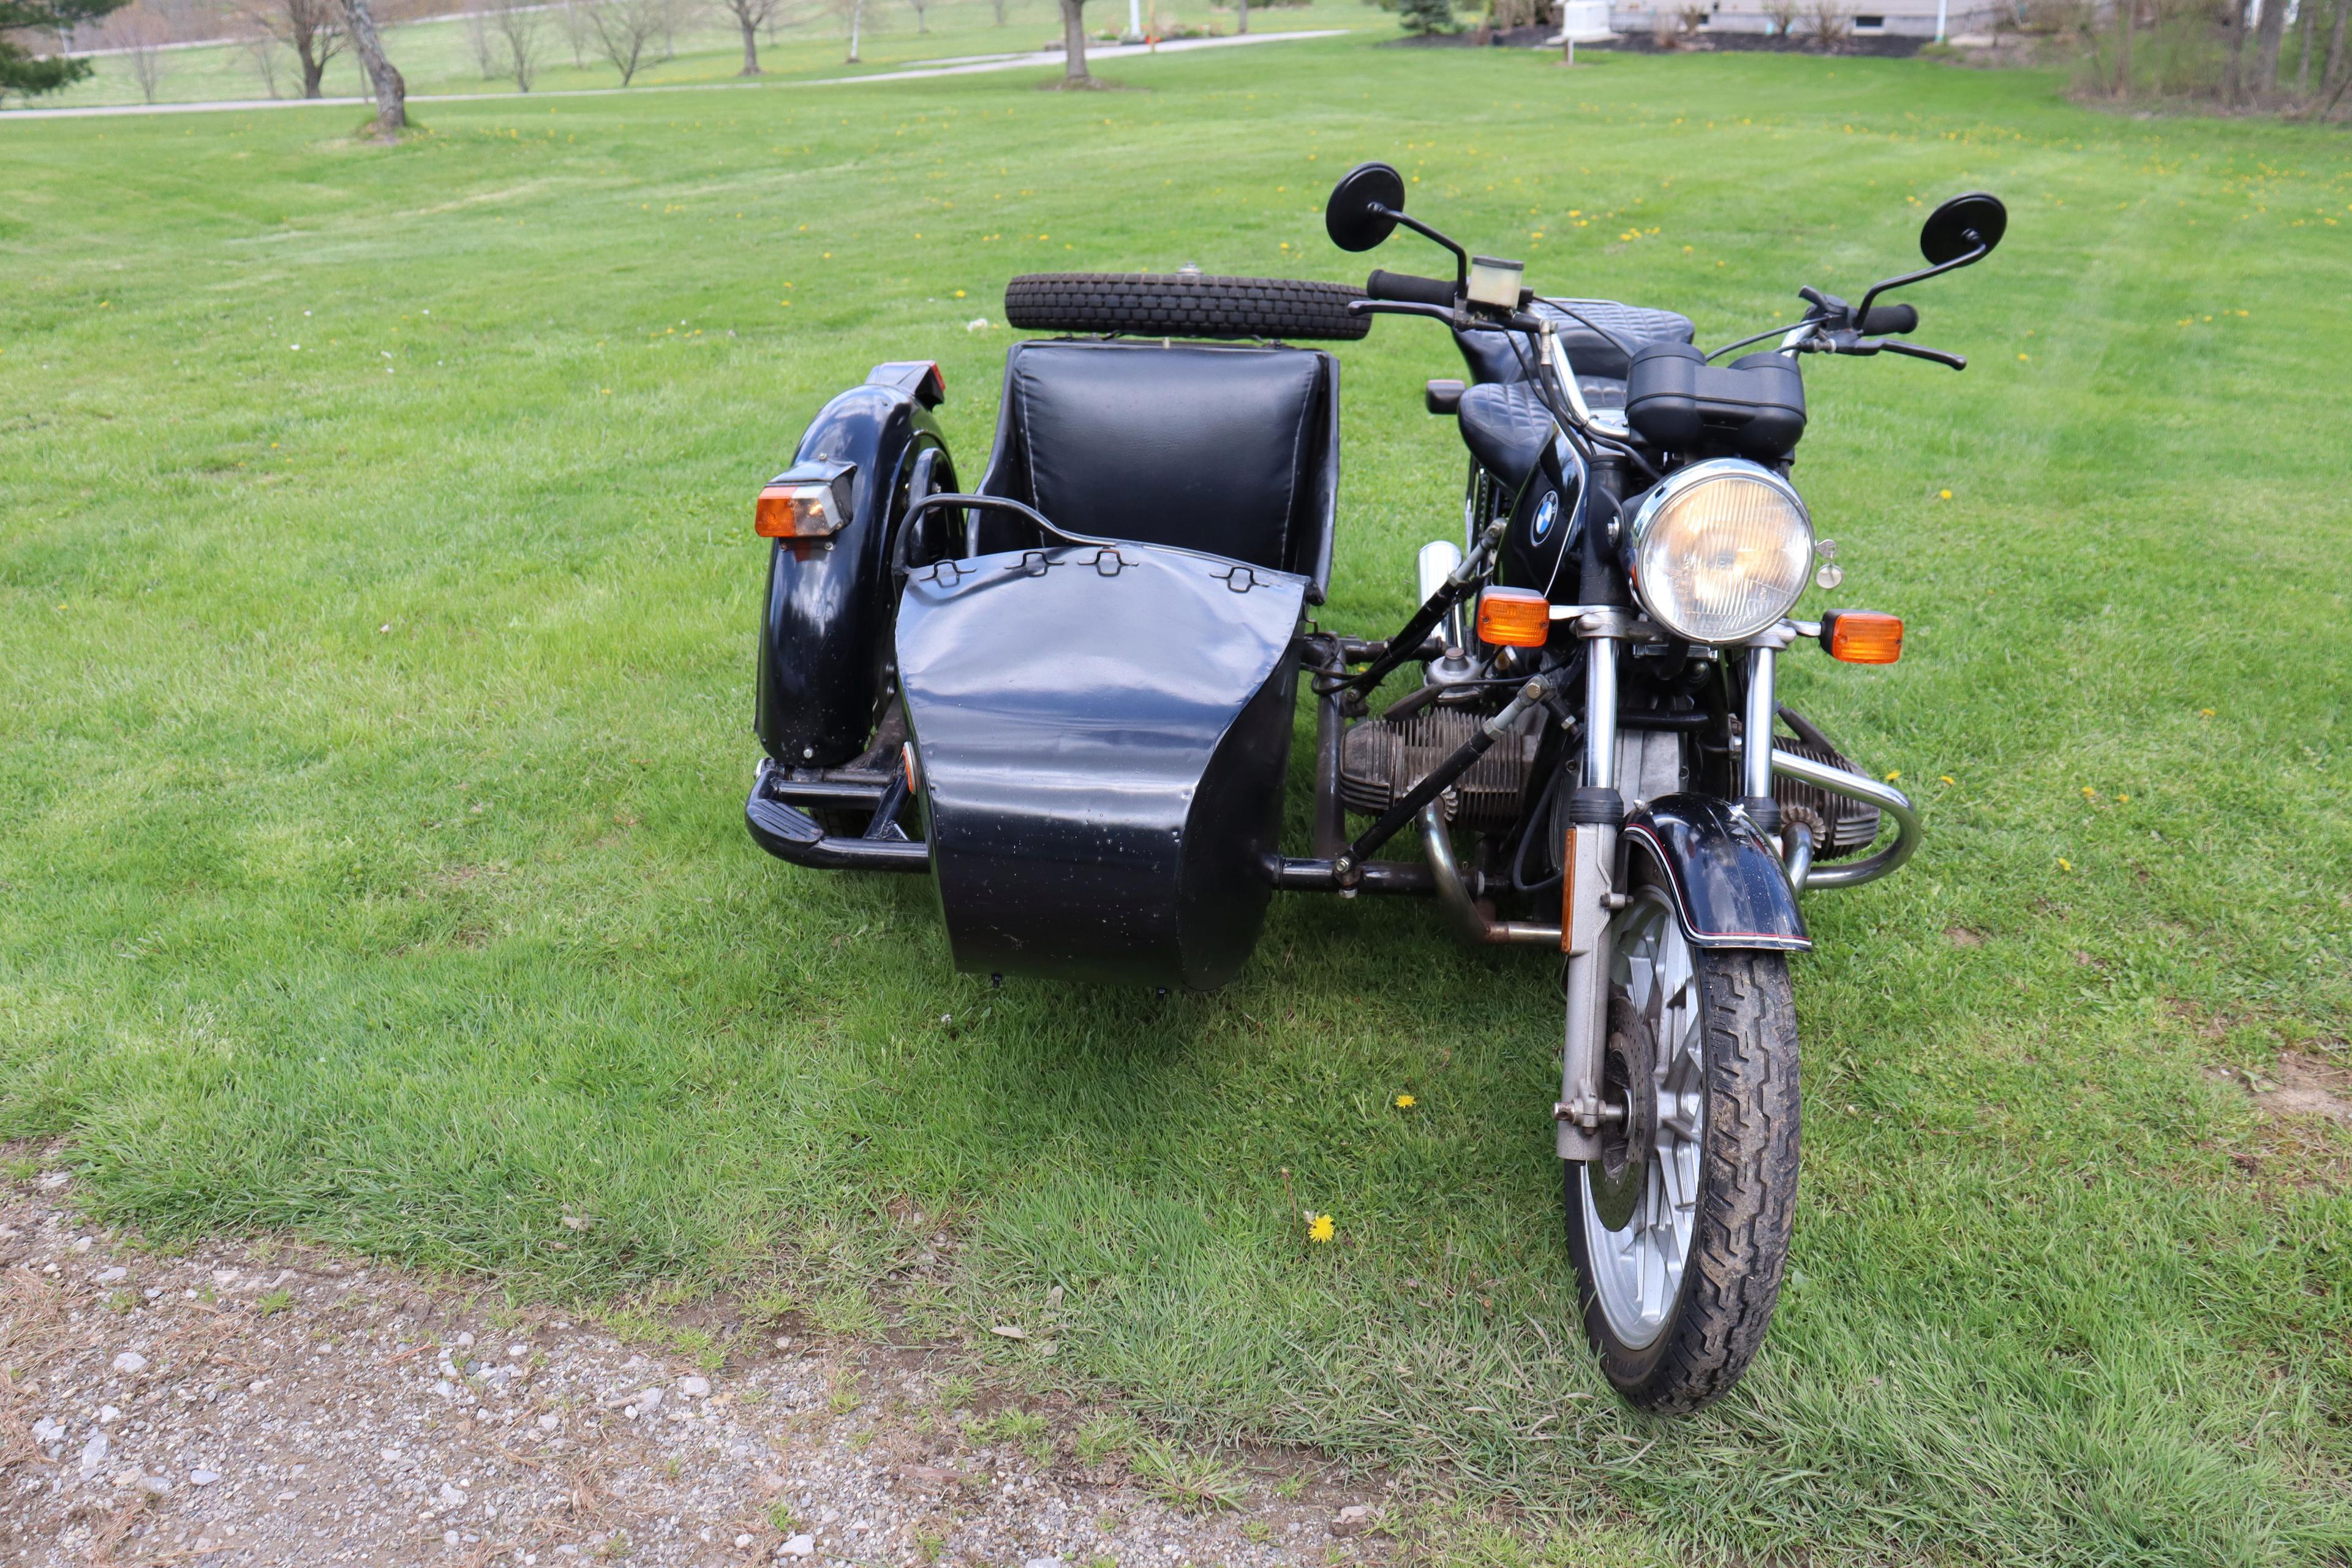 1981 BMW  R100 motorcycle with side car, 32,355 miles, VIN 6175201